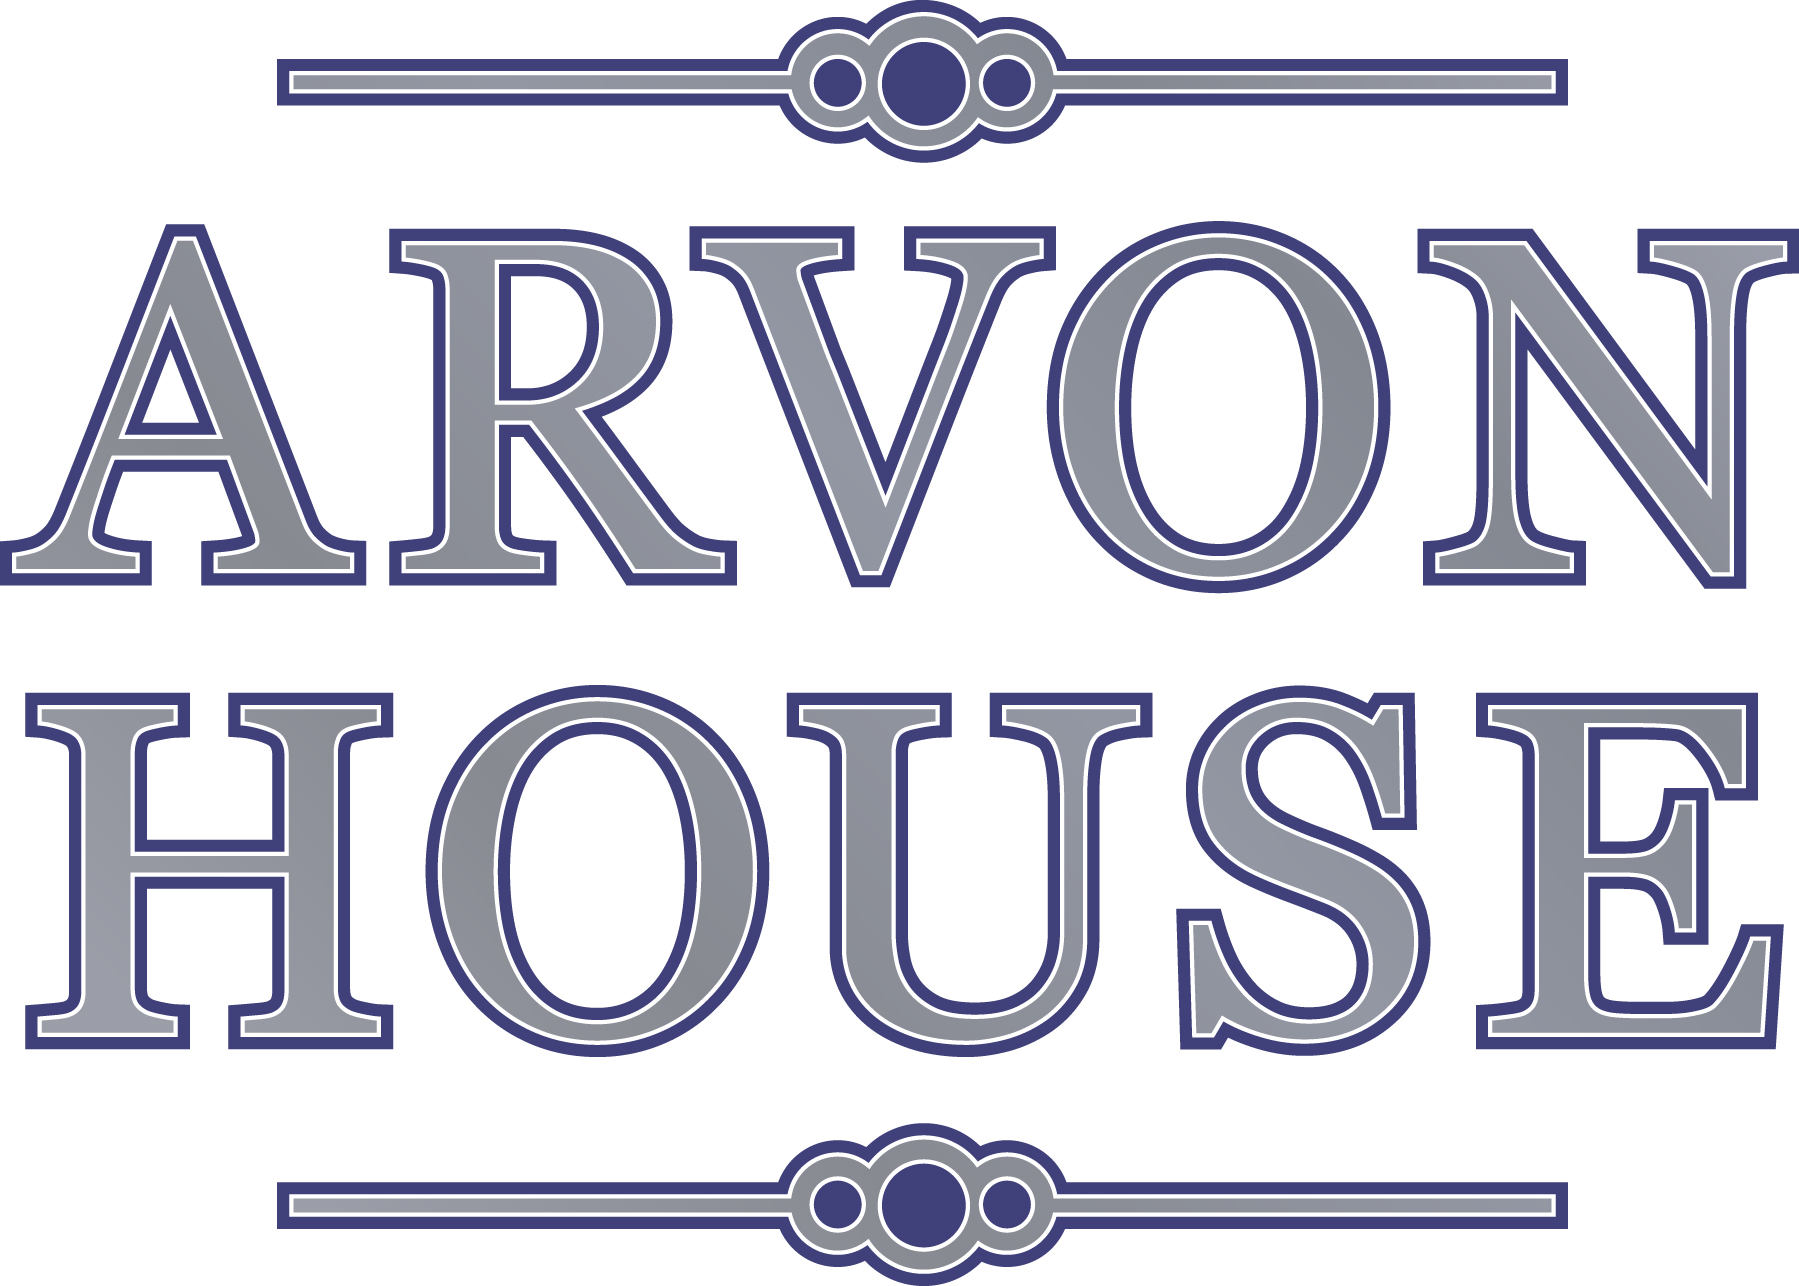 Arvon House, holiday accommodation in the centre of Llandudno.